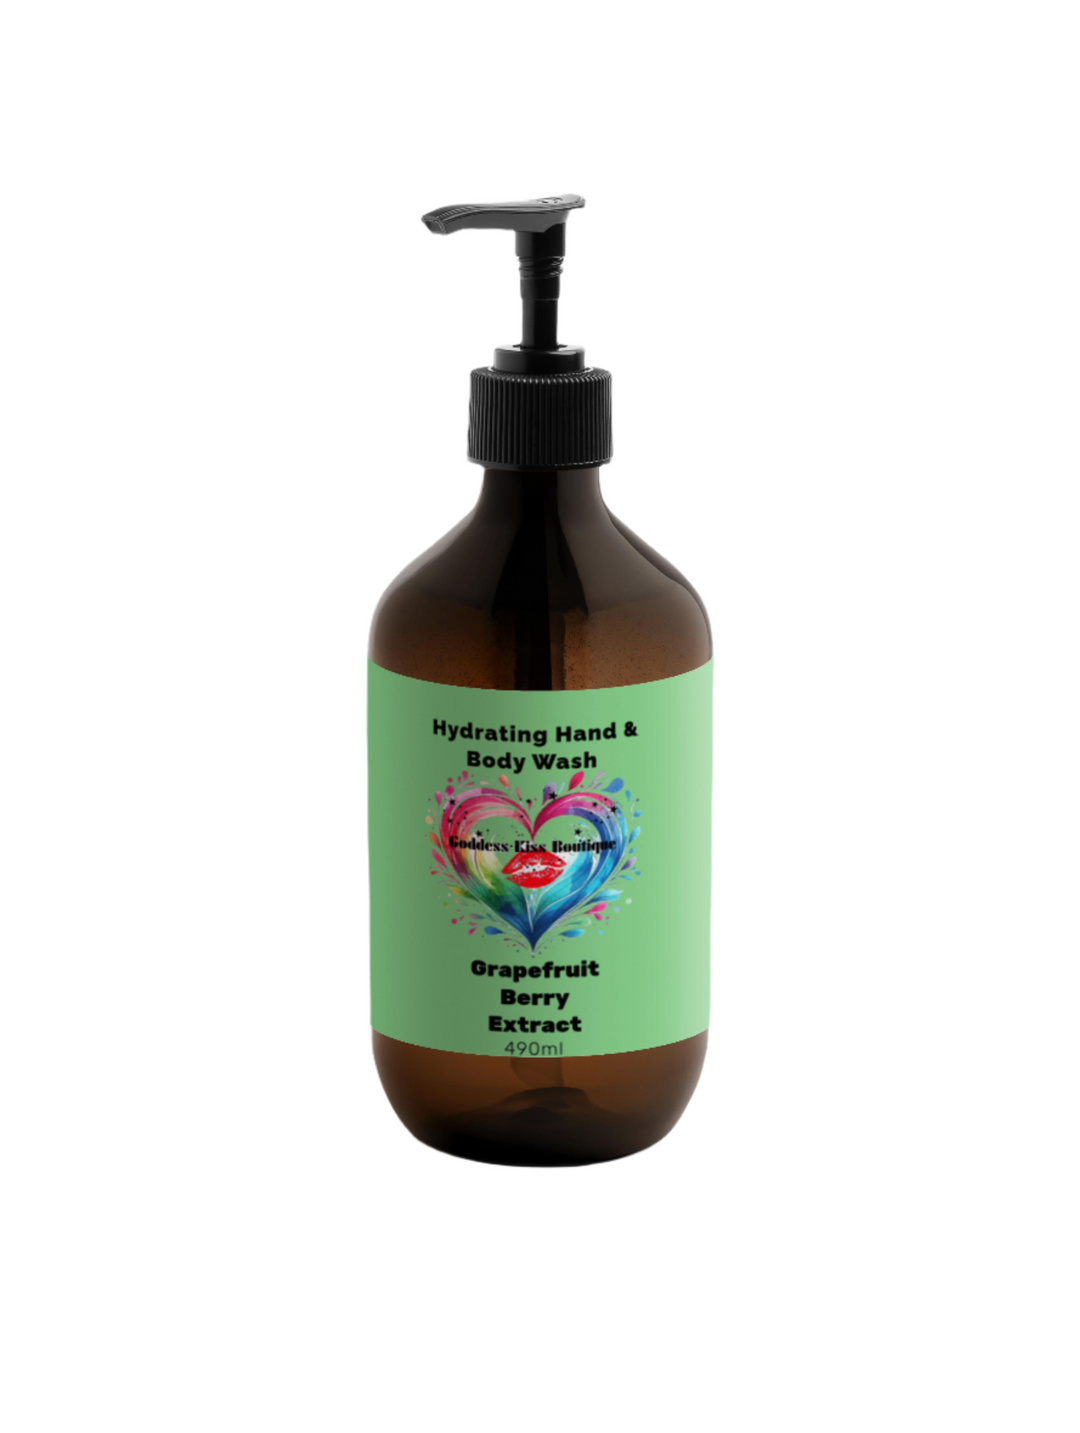 Hand & Body Wash: Hydrating Grapefruit Berry Extract Cleanser